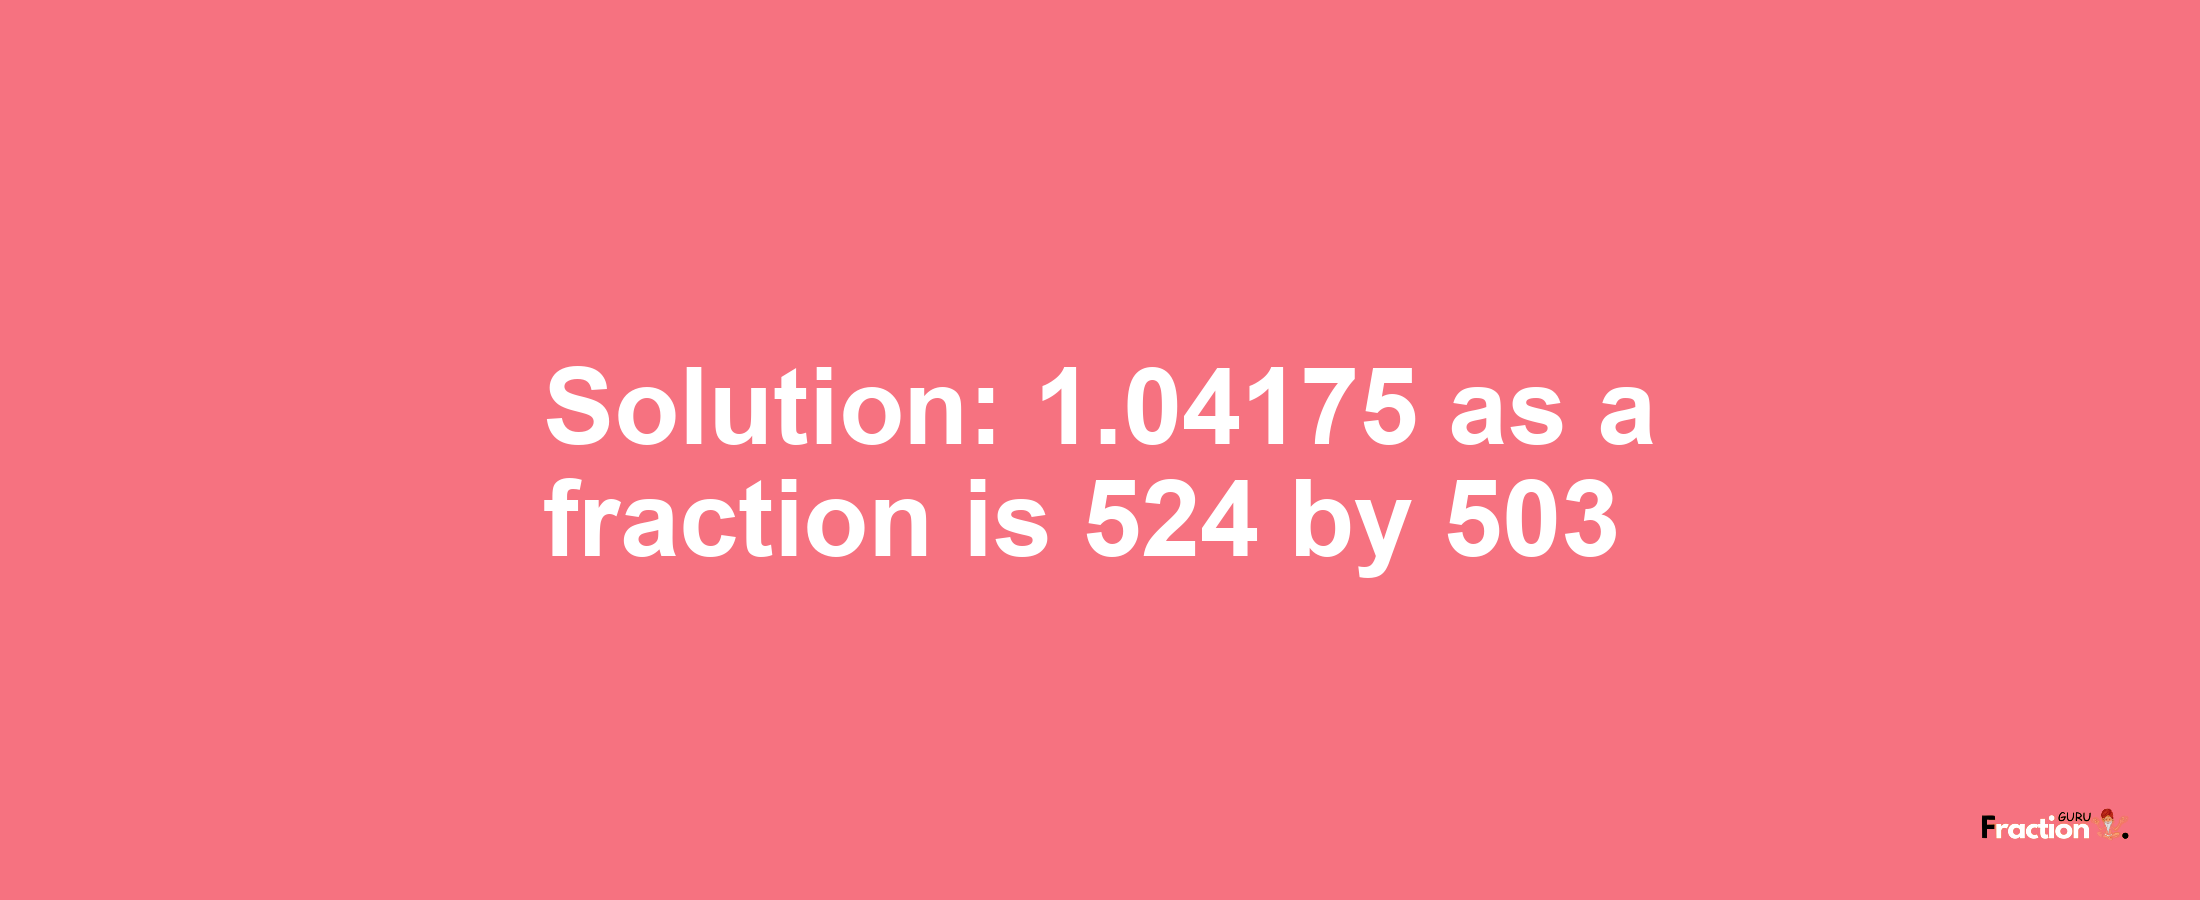 Solution:1.04175 as a fraction is 524/503